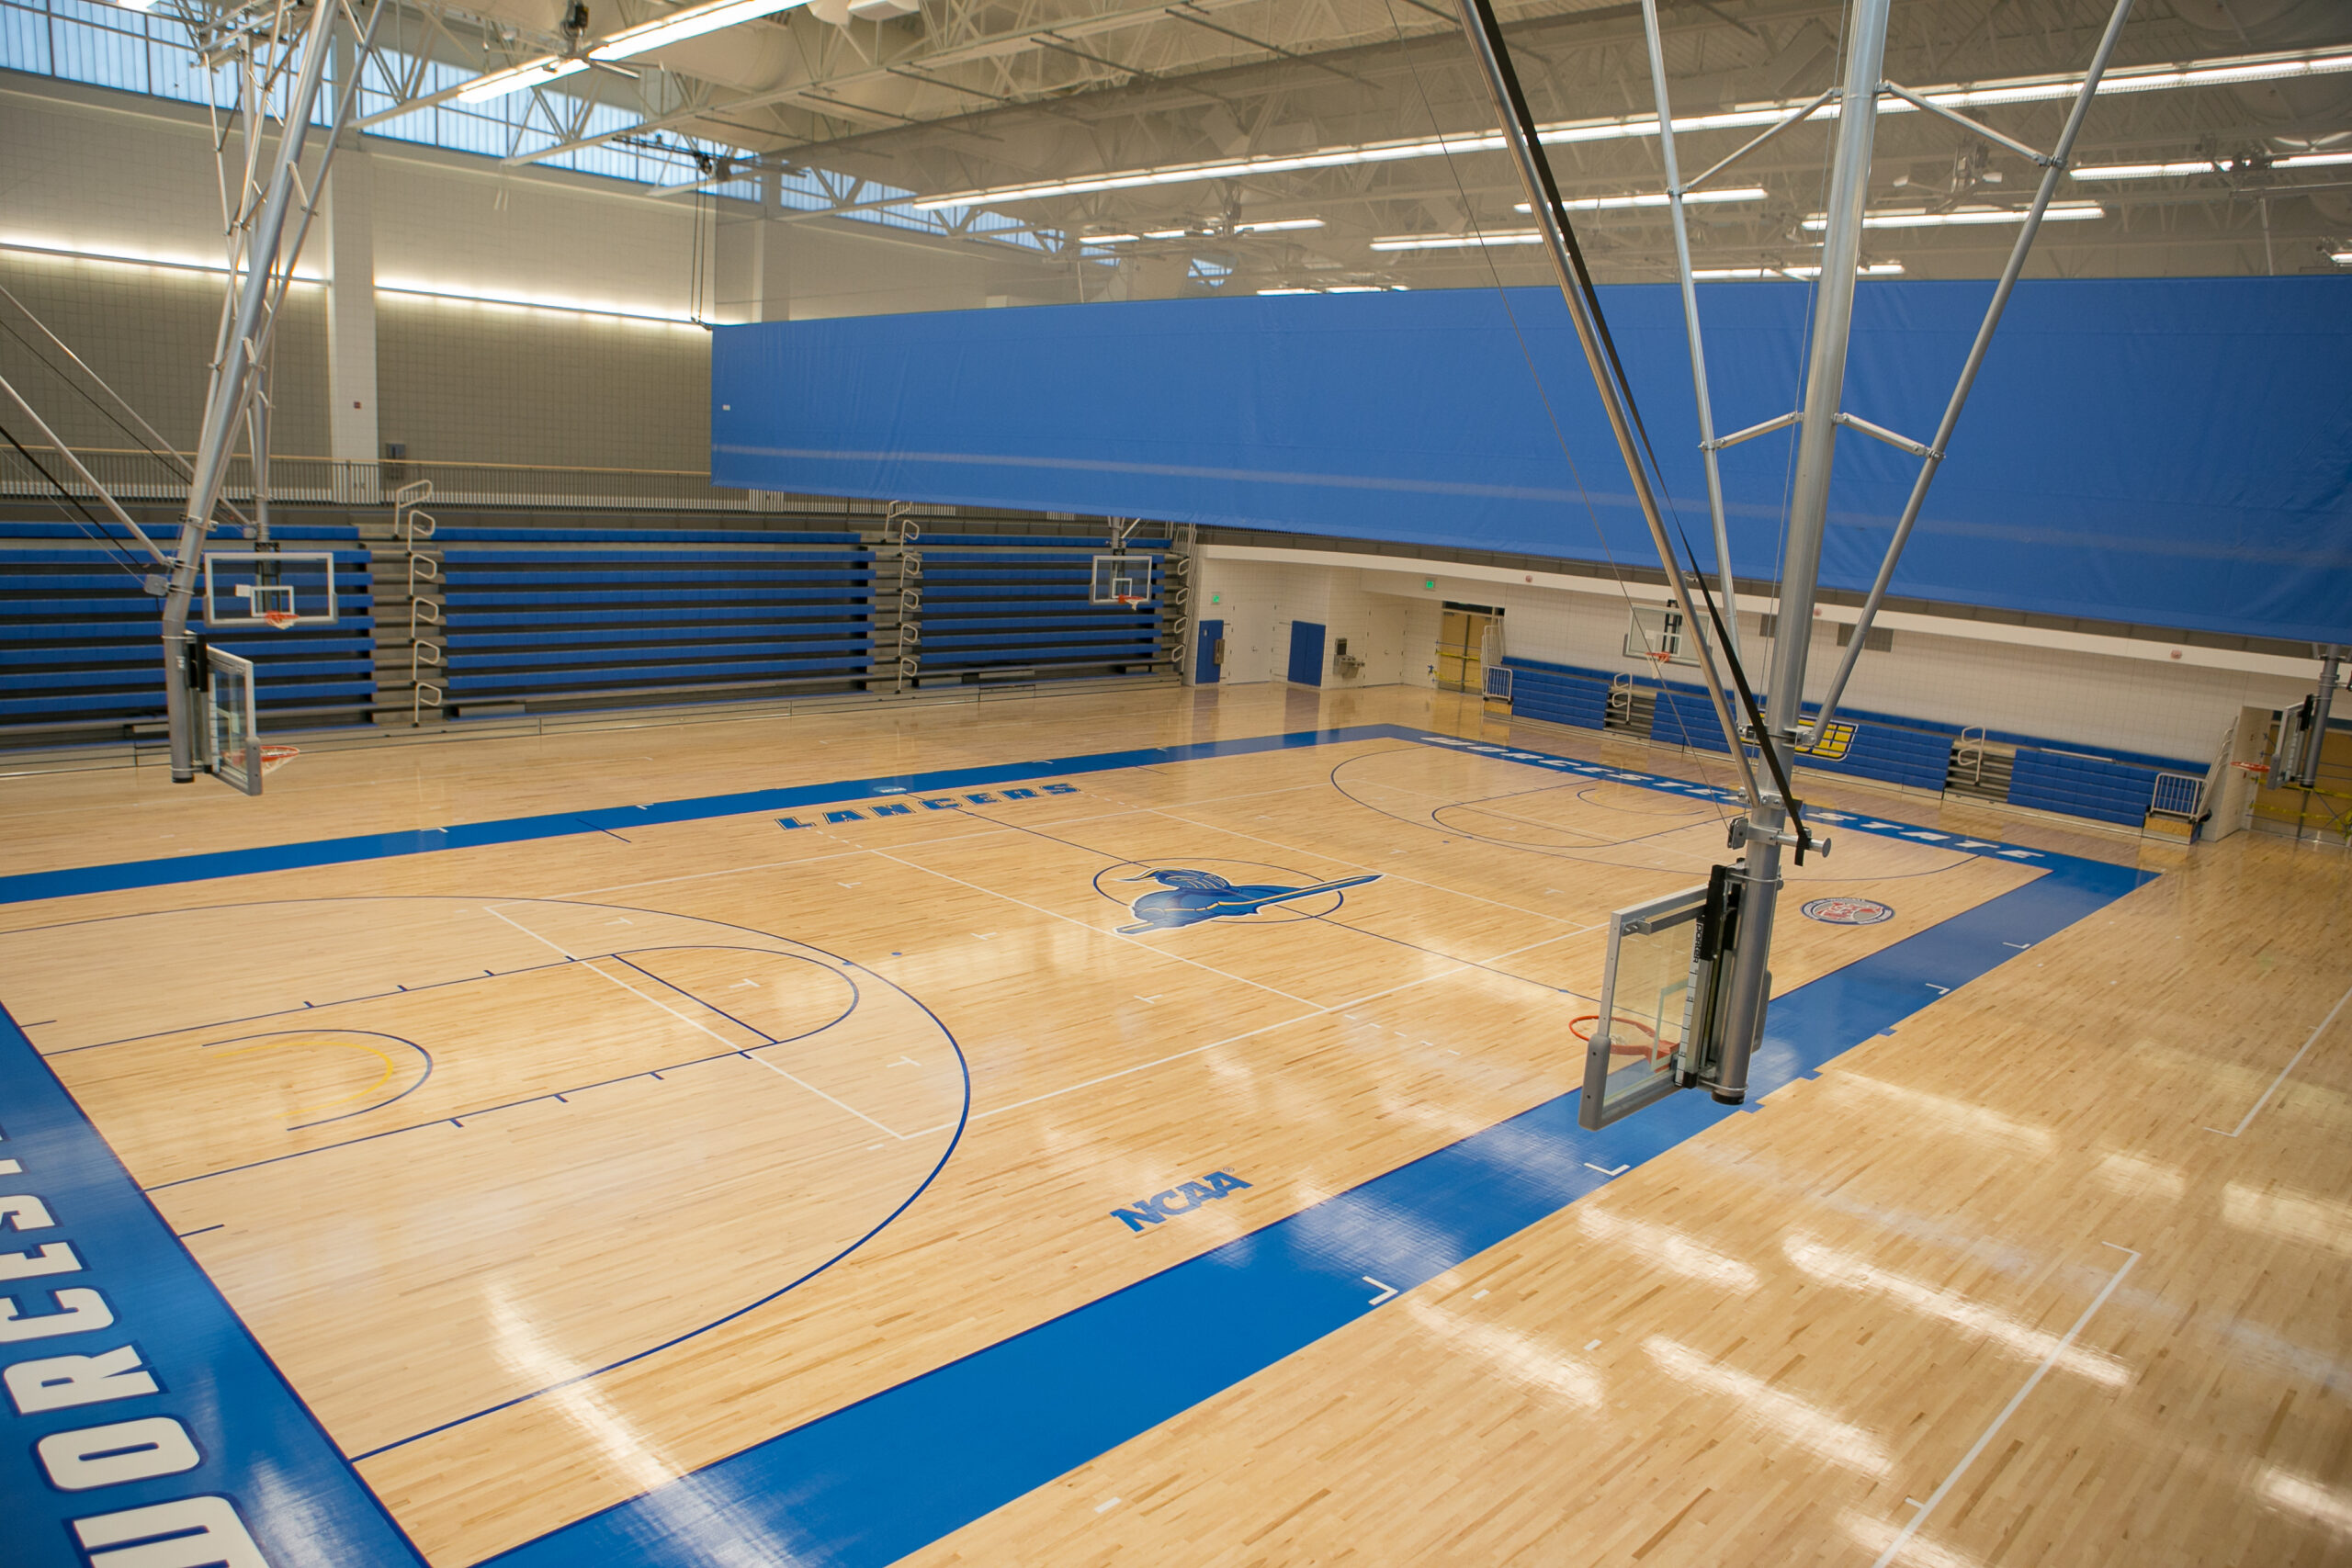 The empty Worcester State basketball court